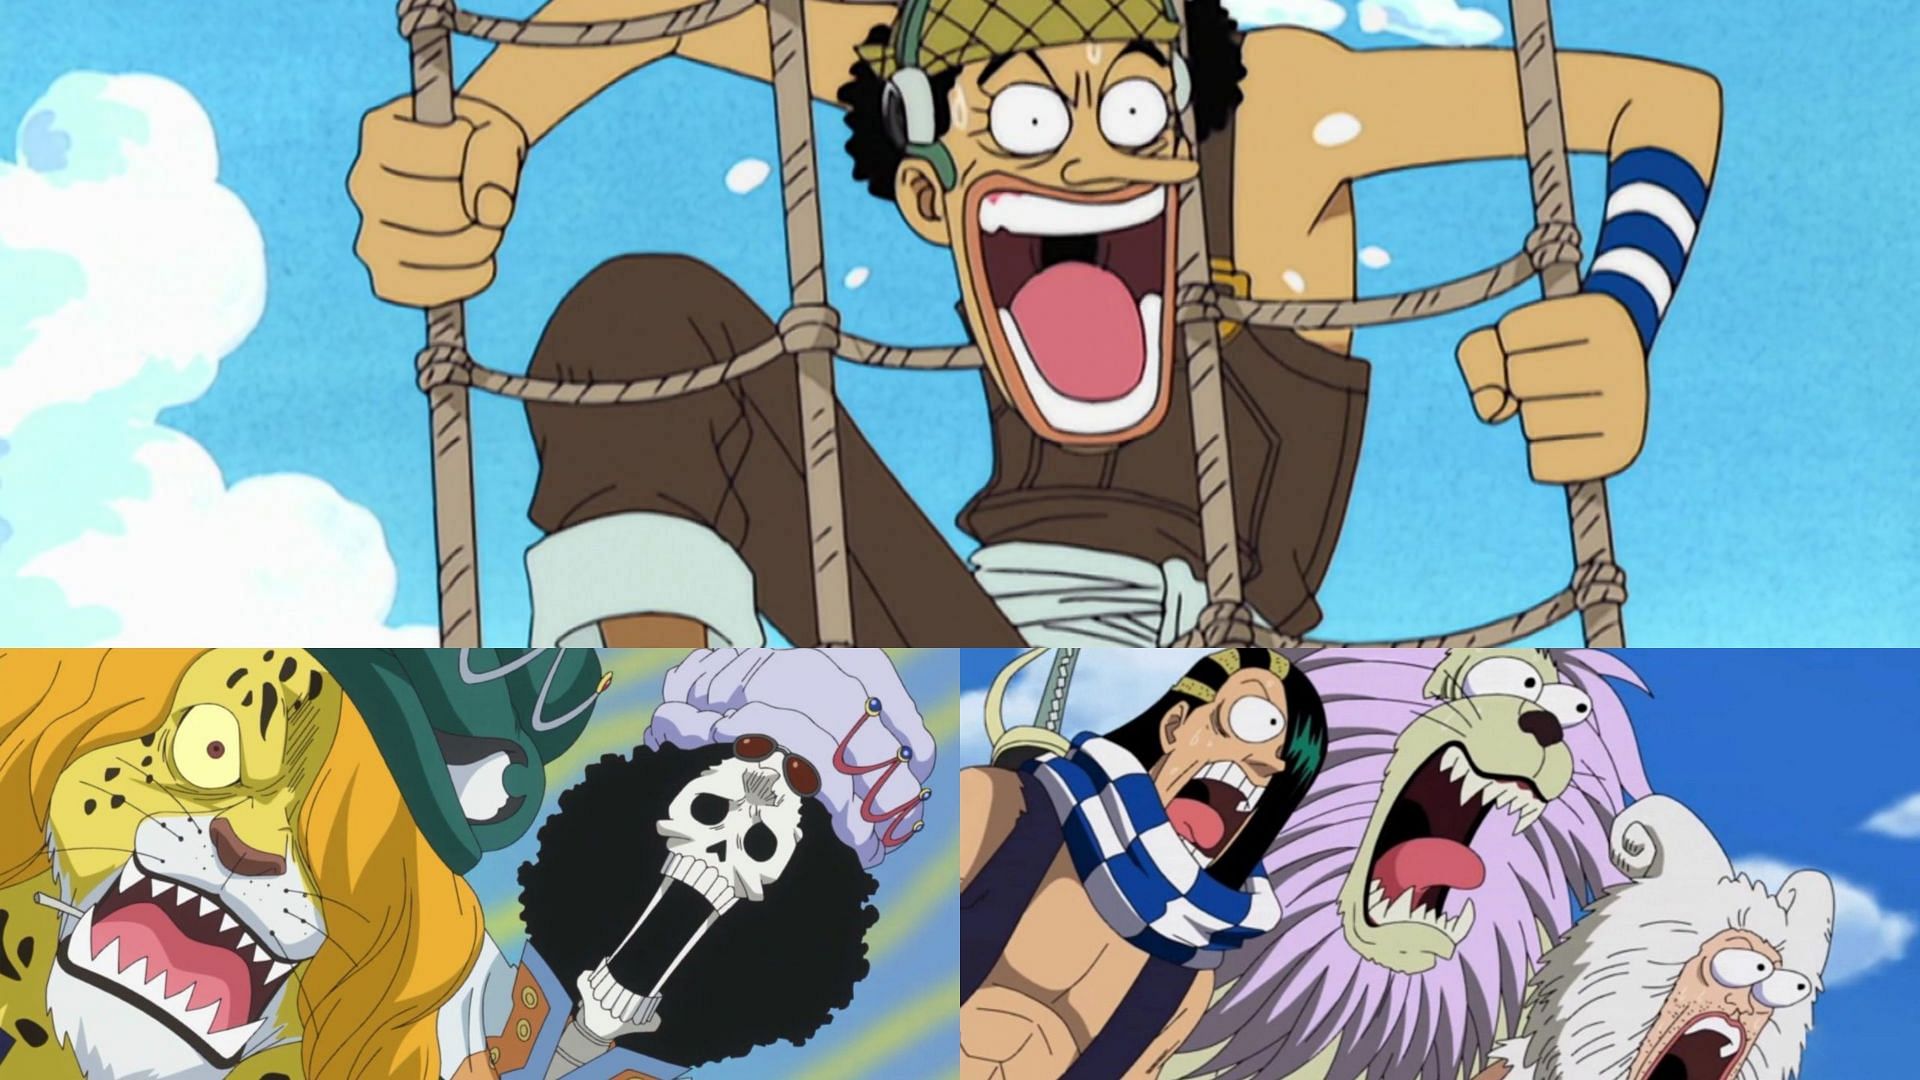 THE ONE PIECE, Special Announcement